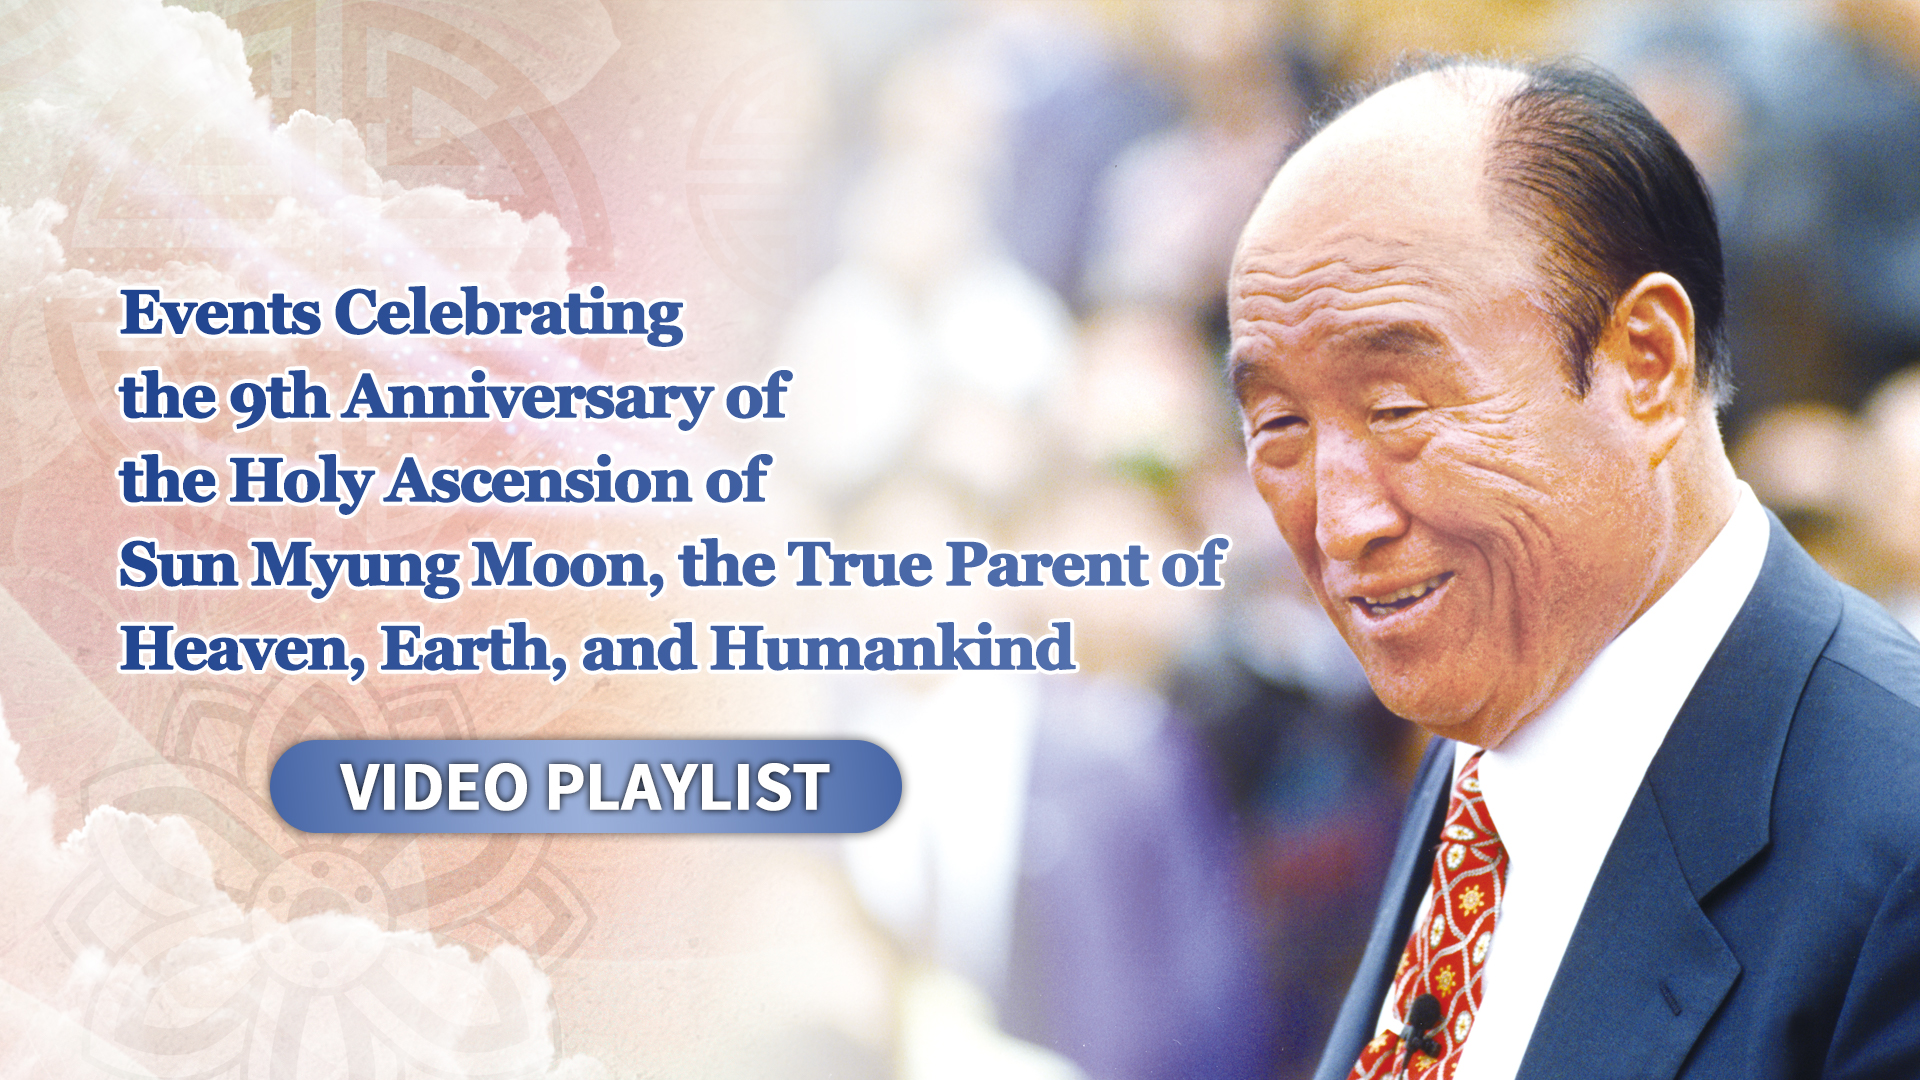 Events Celebrating the 9th Anniversary of the Holy Ascension of Sun Myung Moon